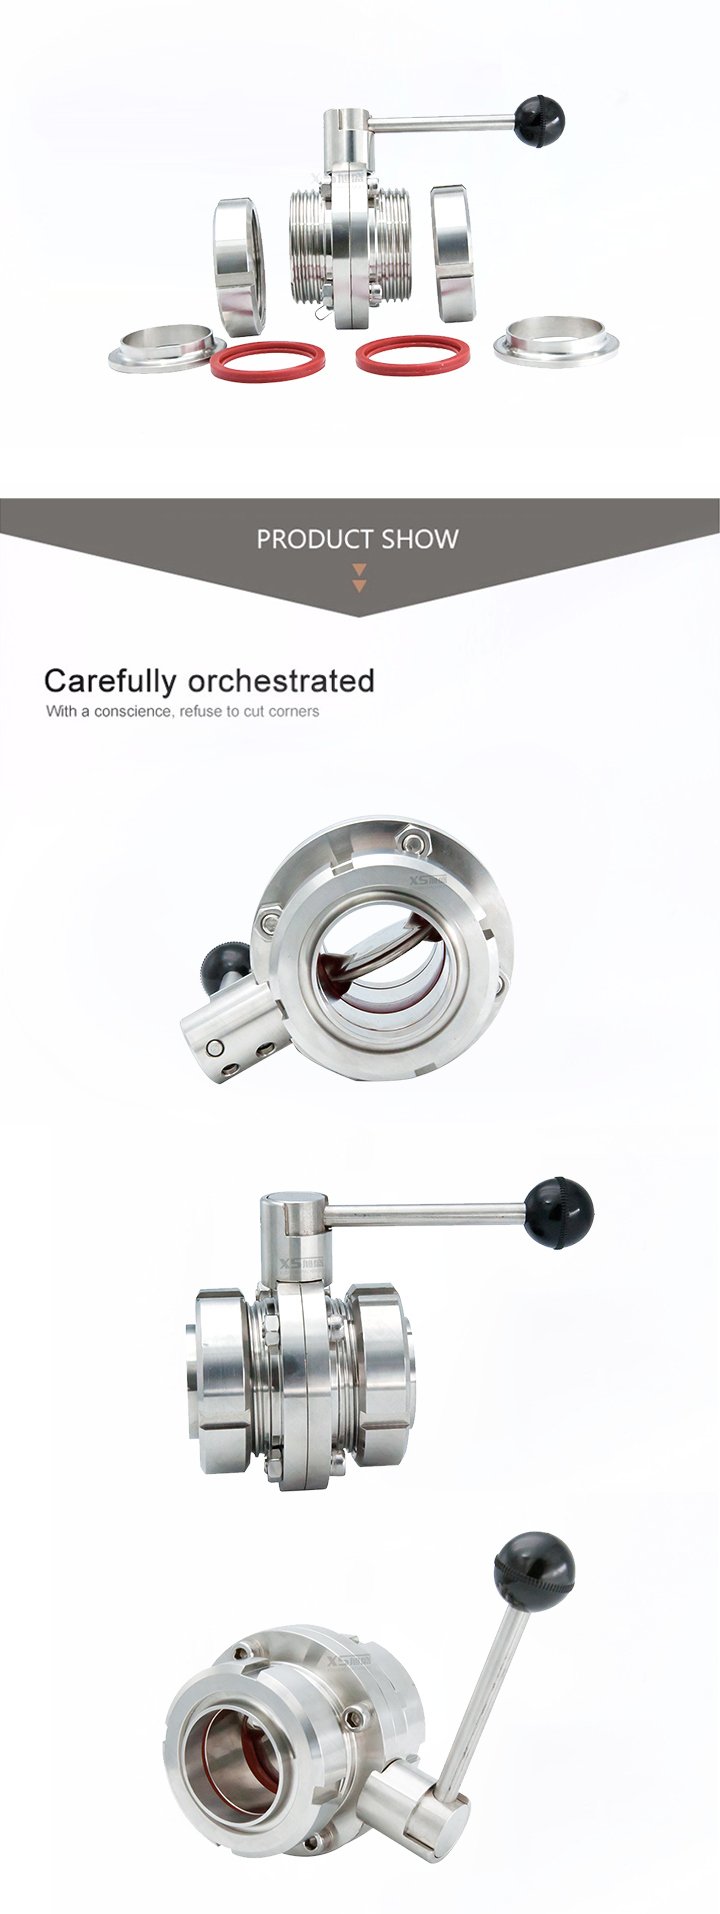 Stainless Steel Sanitary SMS Union Ends Manual Butterfly Valves